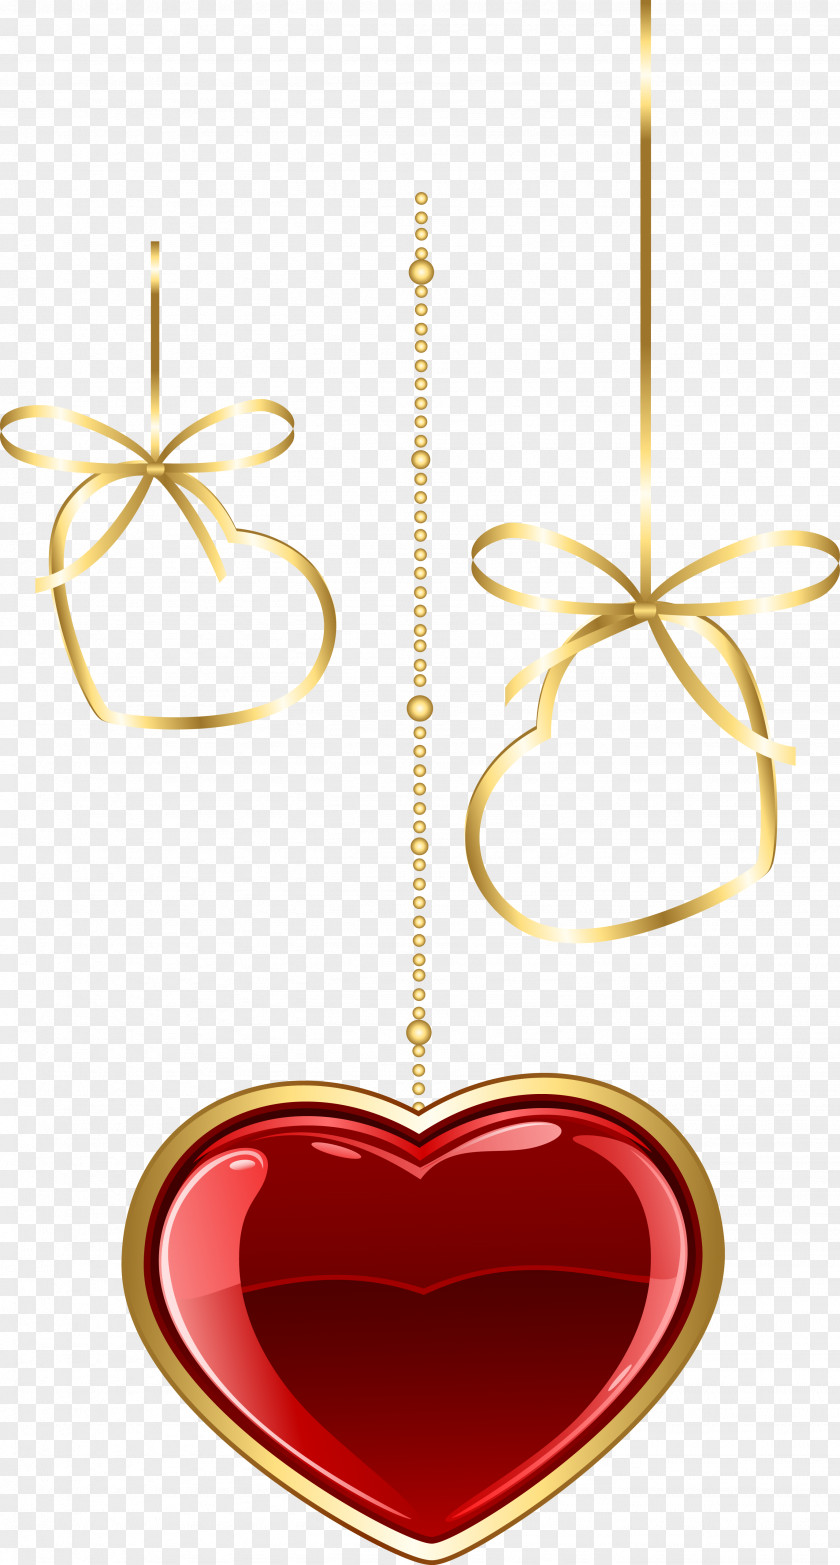 Heart-shaped Decorative Elements Province Of Monza And Brianza Heart Valentine's Day Computer File PNG